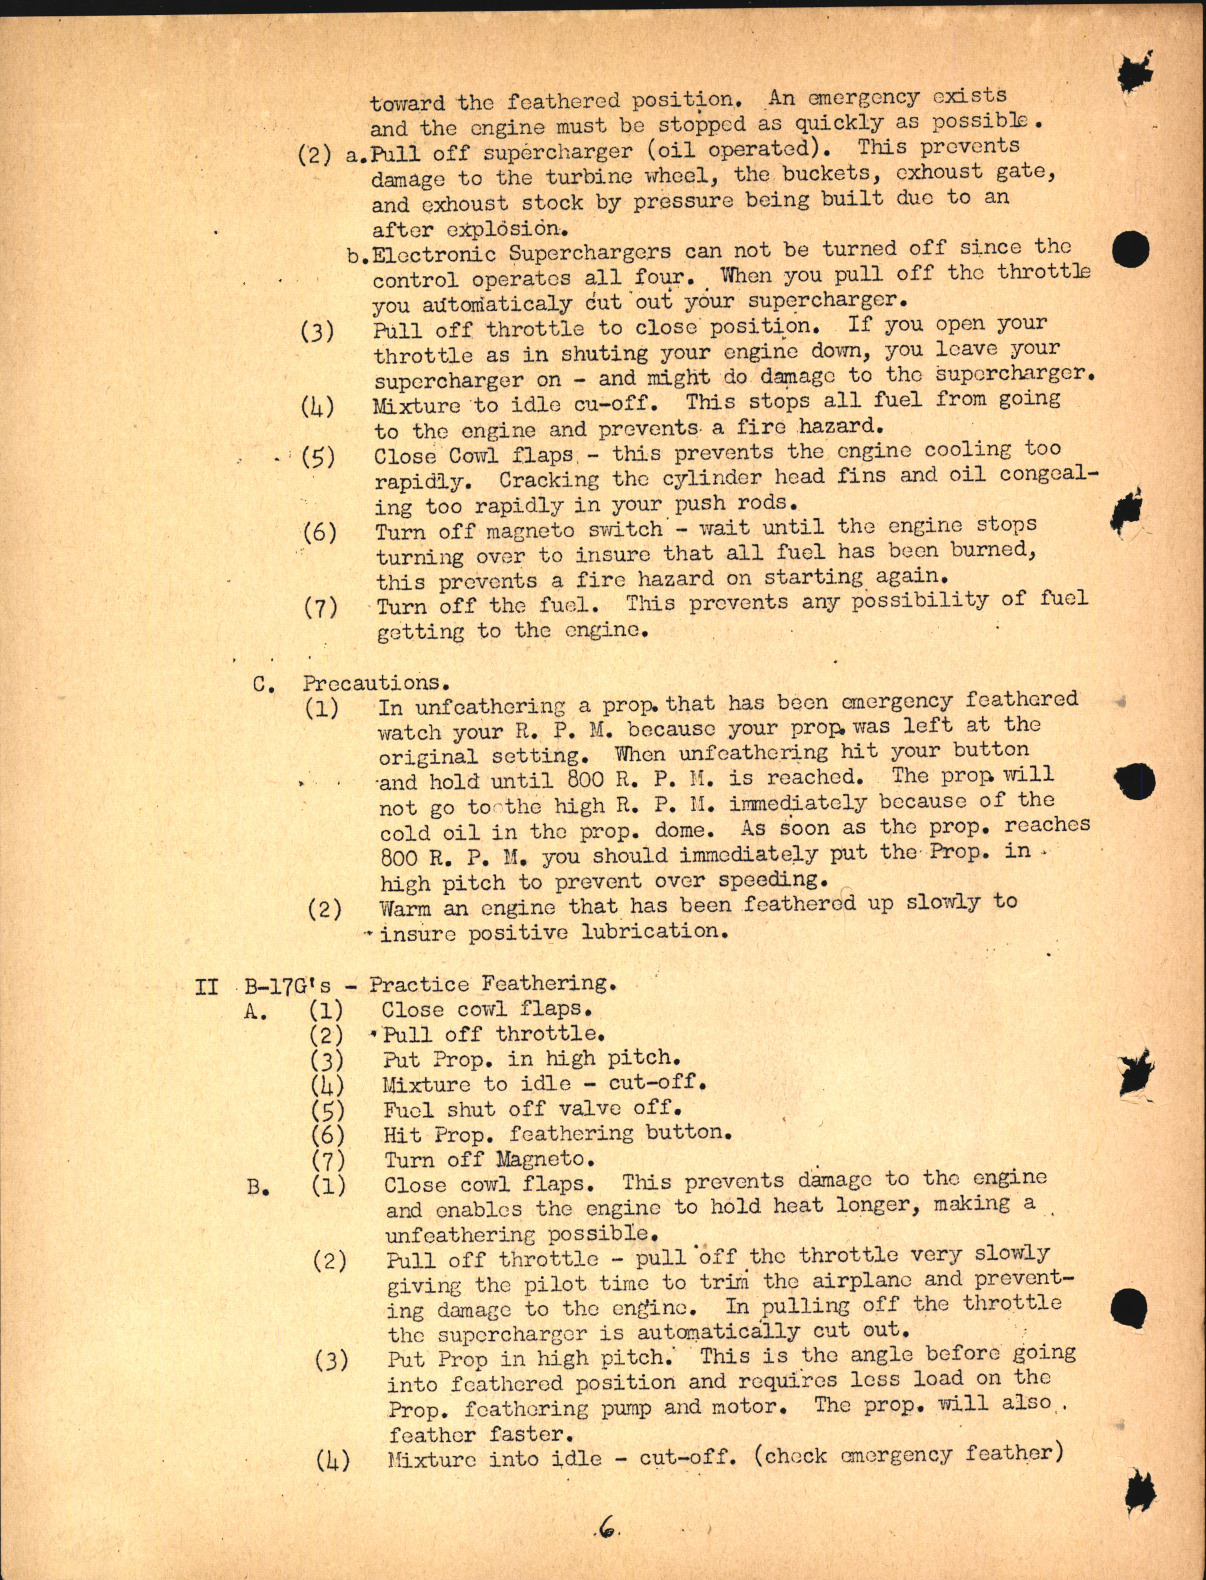 Sample page 8 from AirCorps Library document: Primary Flight Instructions for B-24, C-87, and B-17, Flight Engineer Division